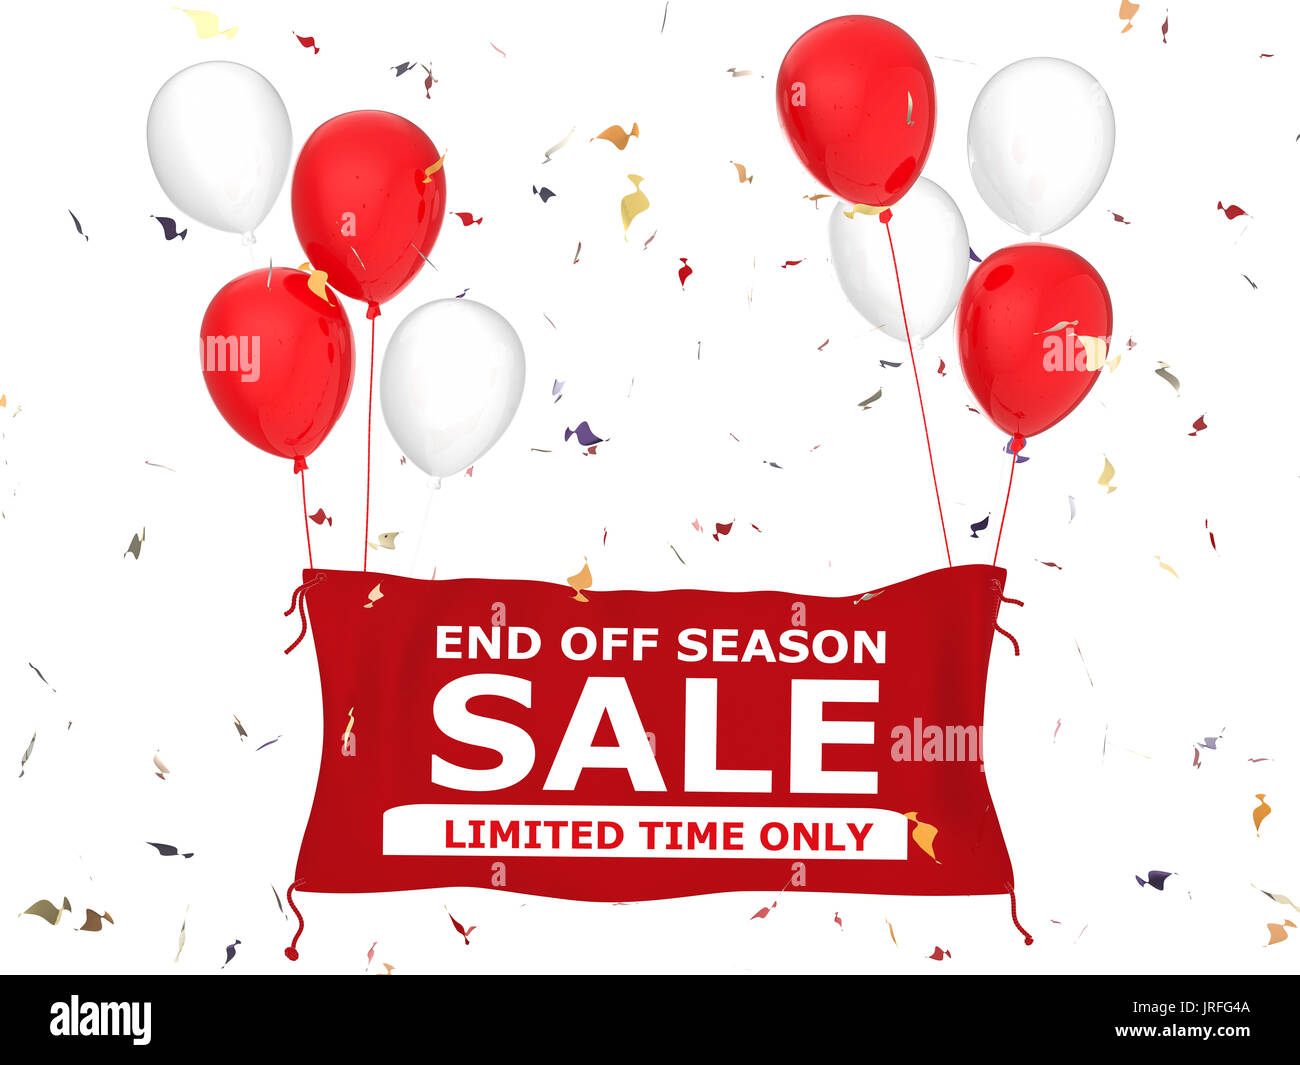 3d Rendering End Of Season Sale Banner On Red Cloth With Red